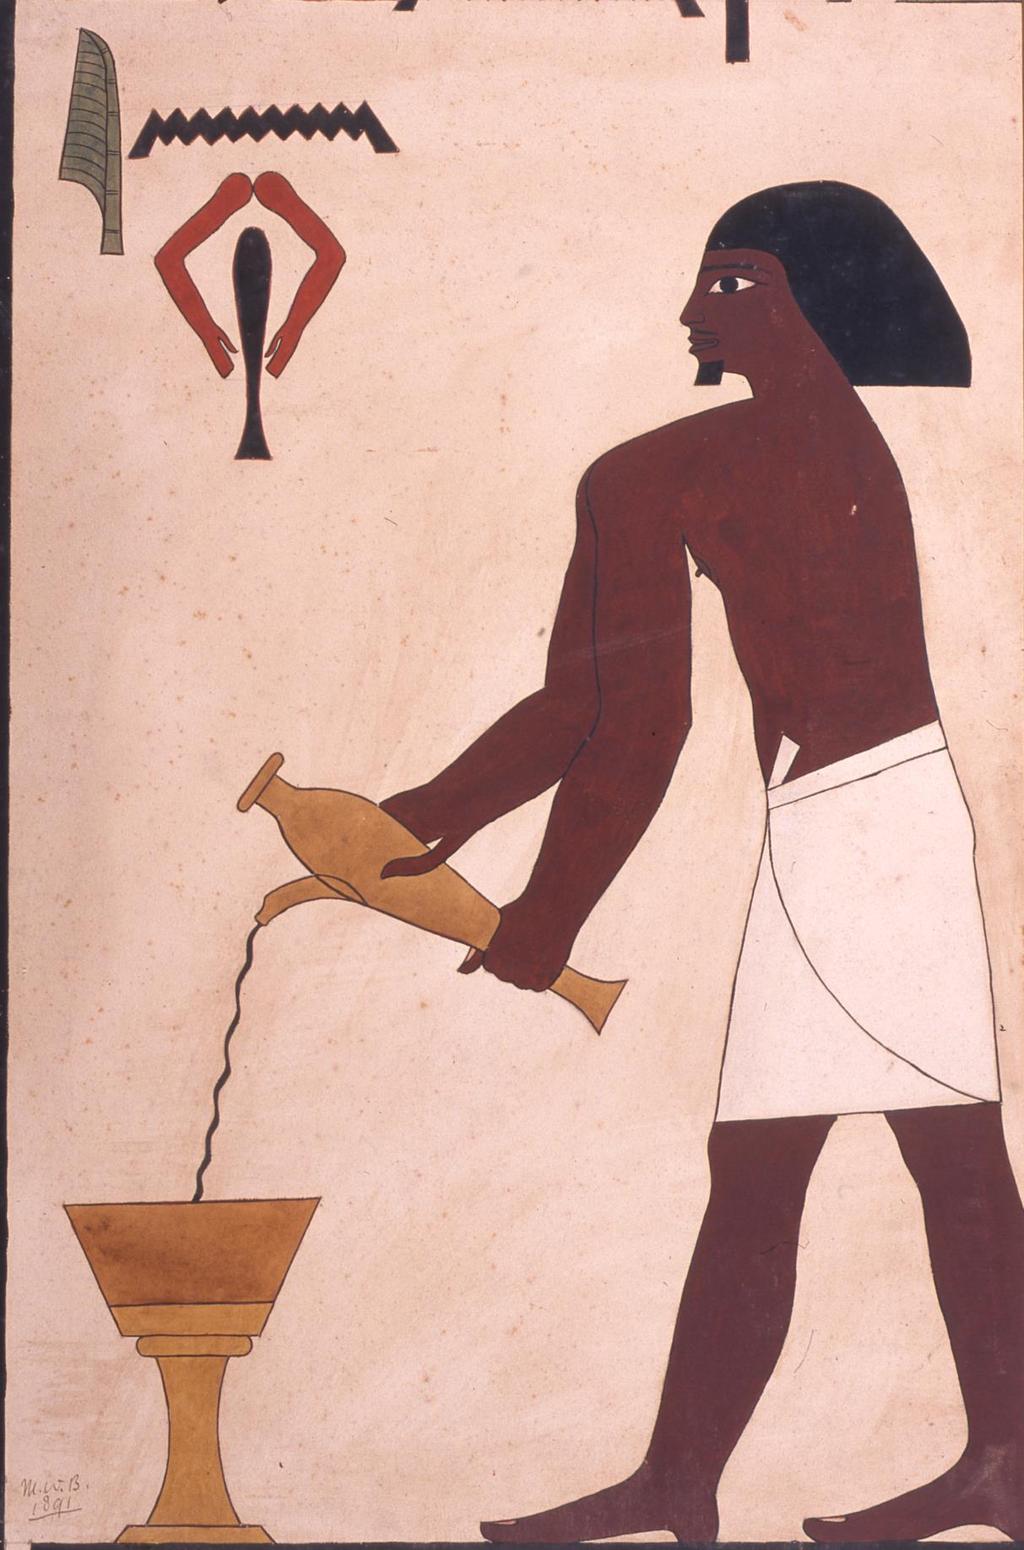 Priest pouring a liquid offering from the